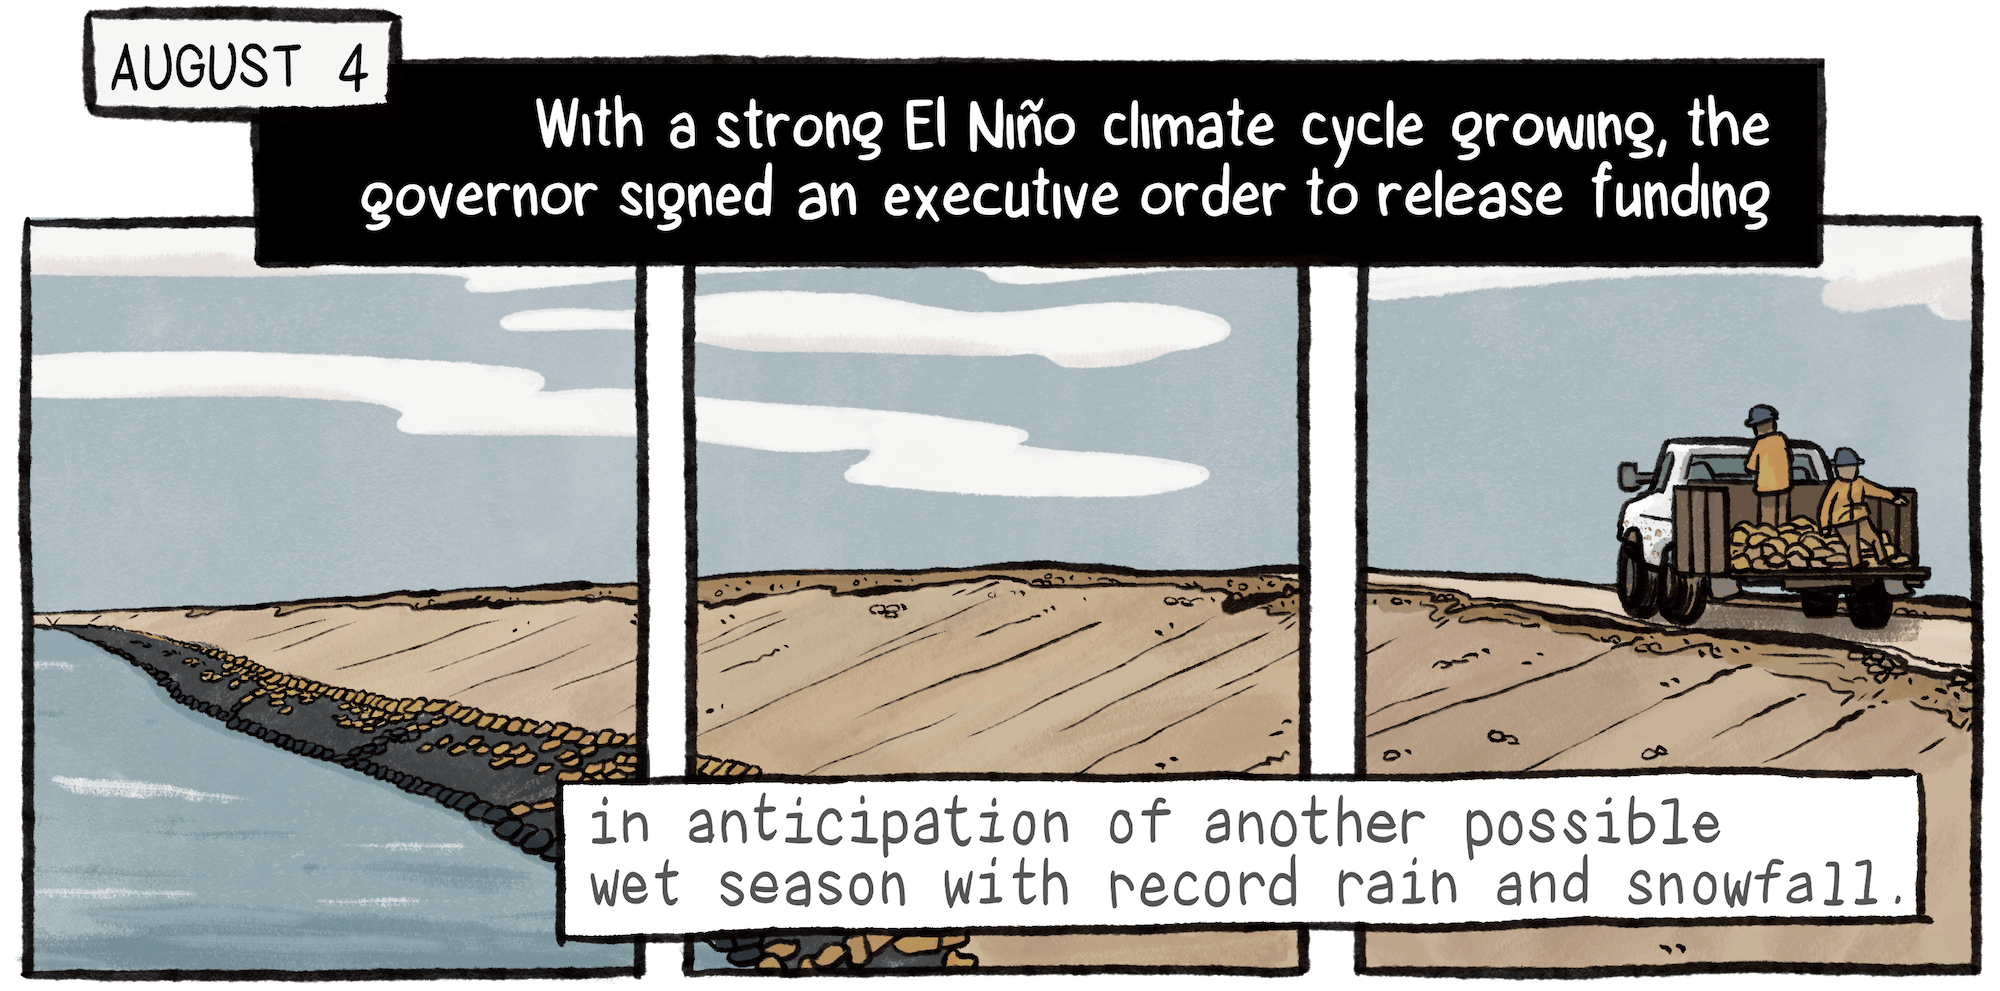 On August 4, the governor signed an executive order to release funding, in anticipation of another possible wet season due to the incoming El Niño climate cycle. Along the shoreline outside the Corcoran prison complex, a truck drives by with two people in the truck bed.